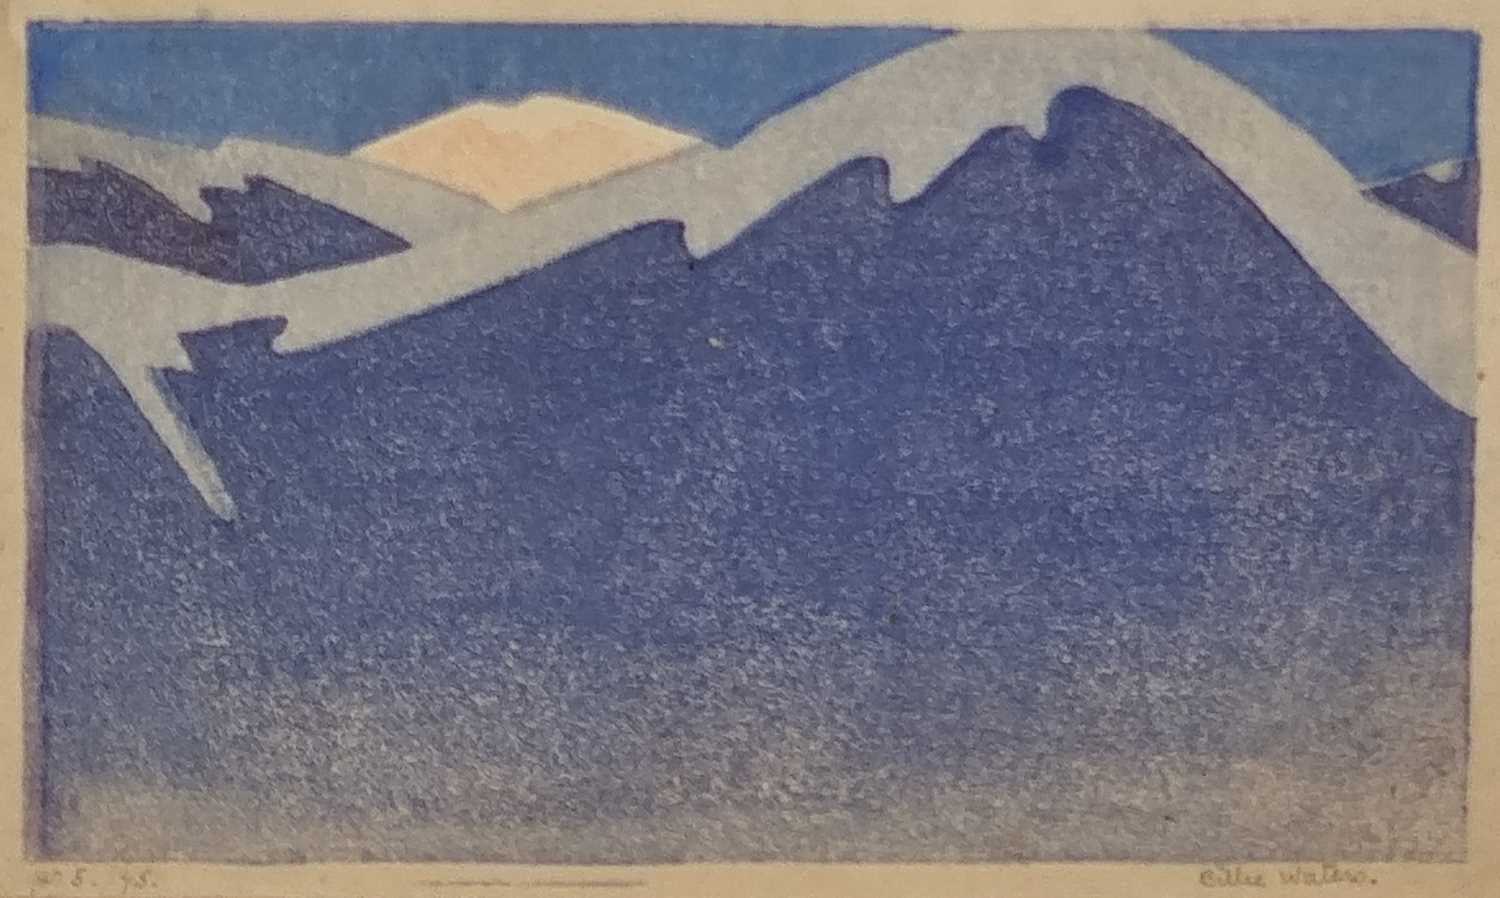 ƚ Billie WATERS (British 1896-1965) Mountains, Aquatint, Signed lower right, dated '45 and